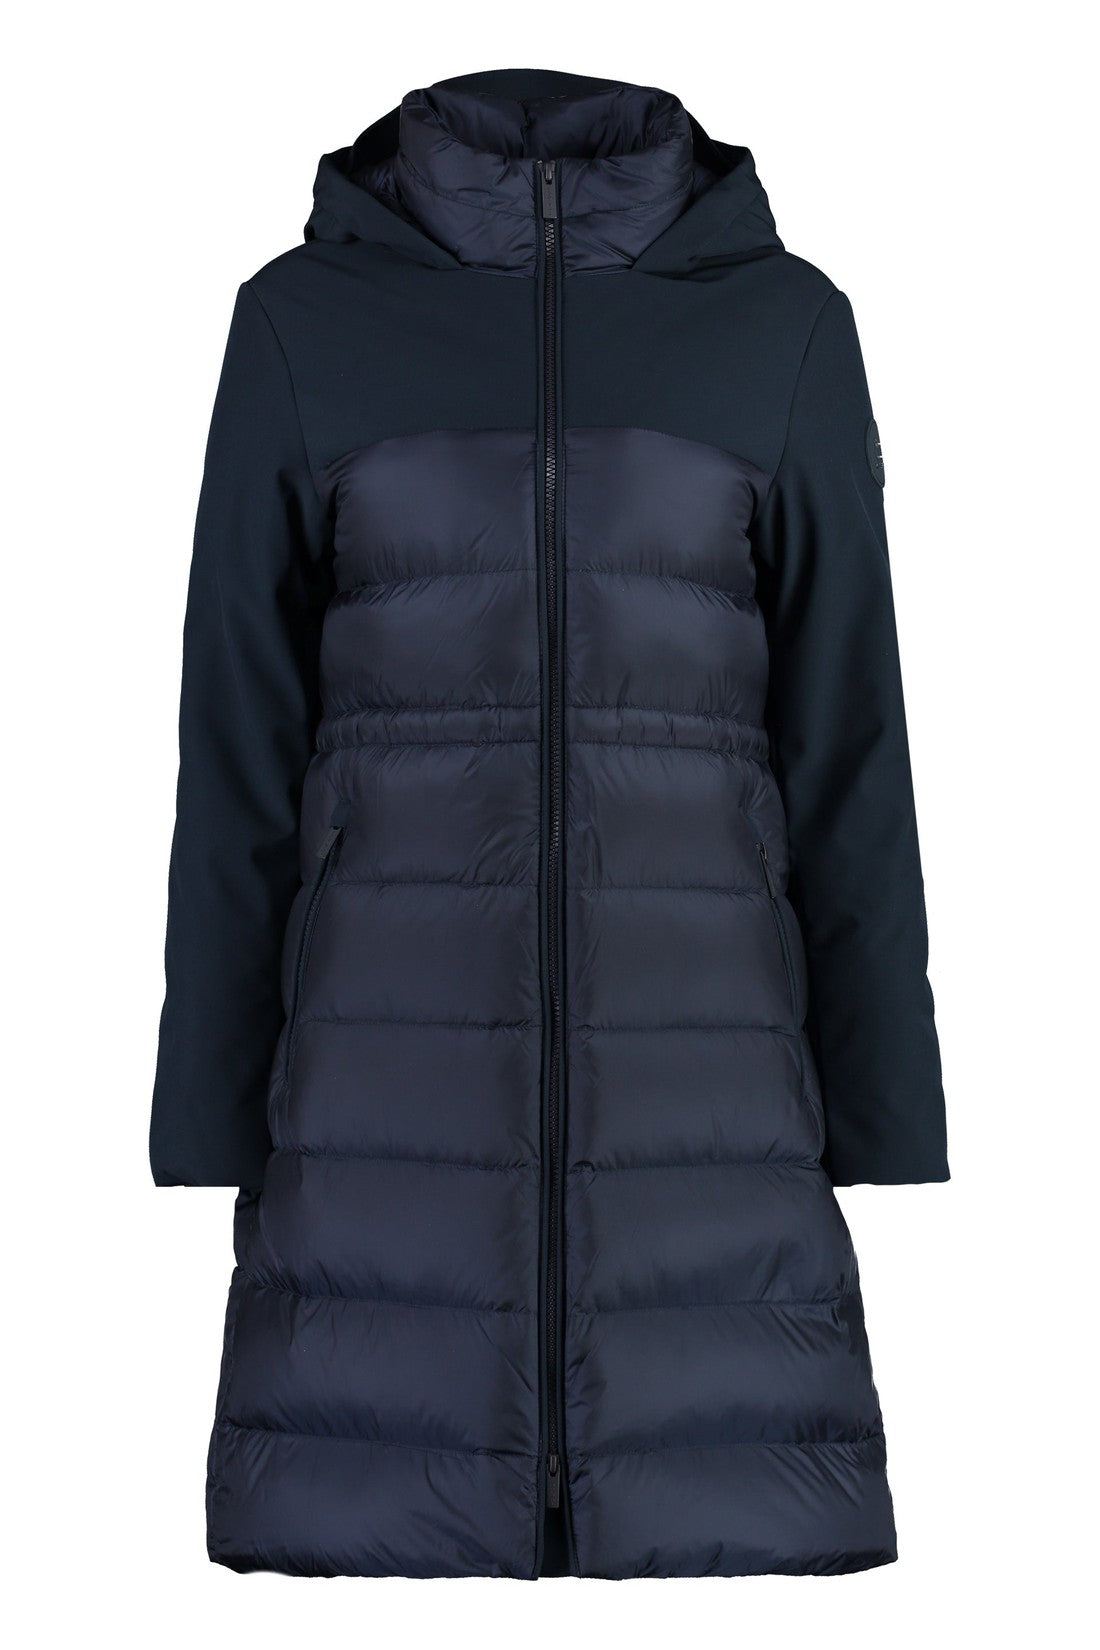 Woolrich-OUTLET-SALE-Long hooded down jacket-ARCHIVIST